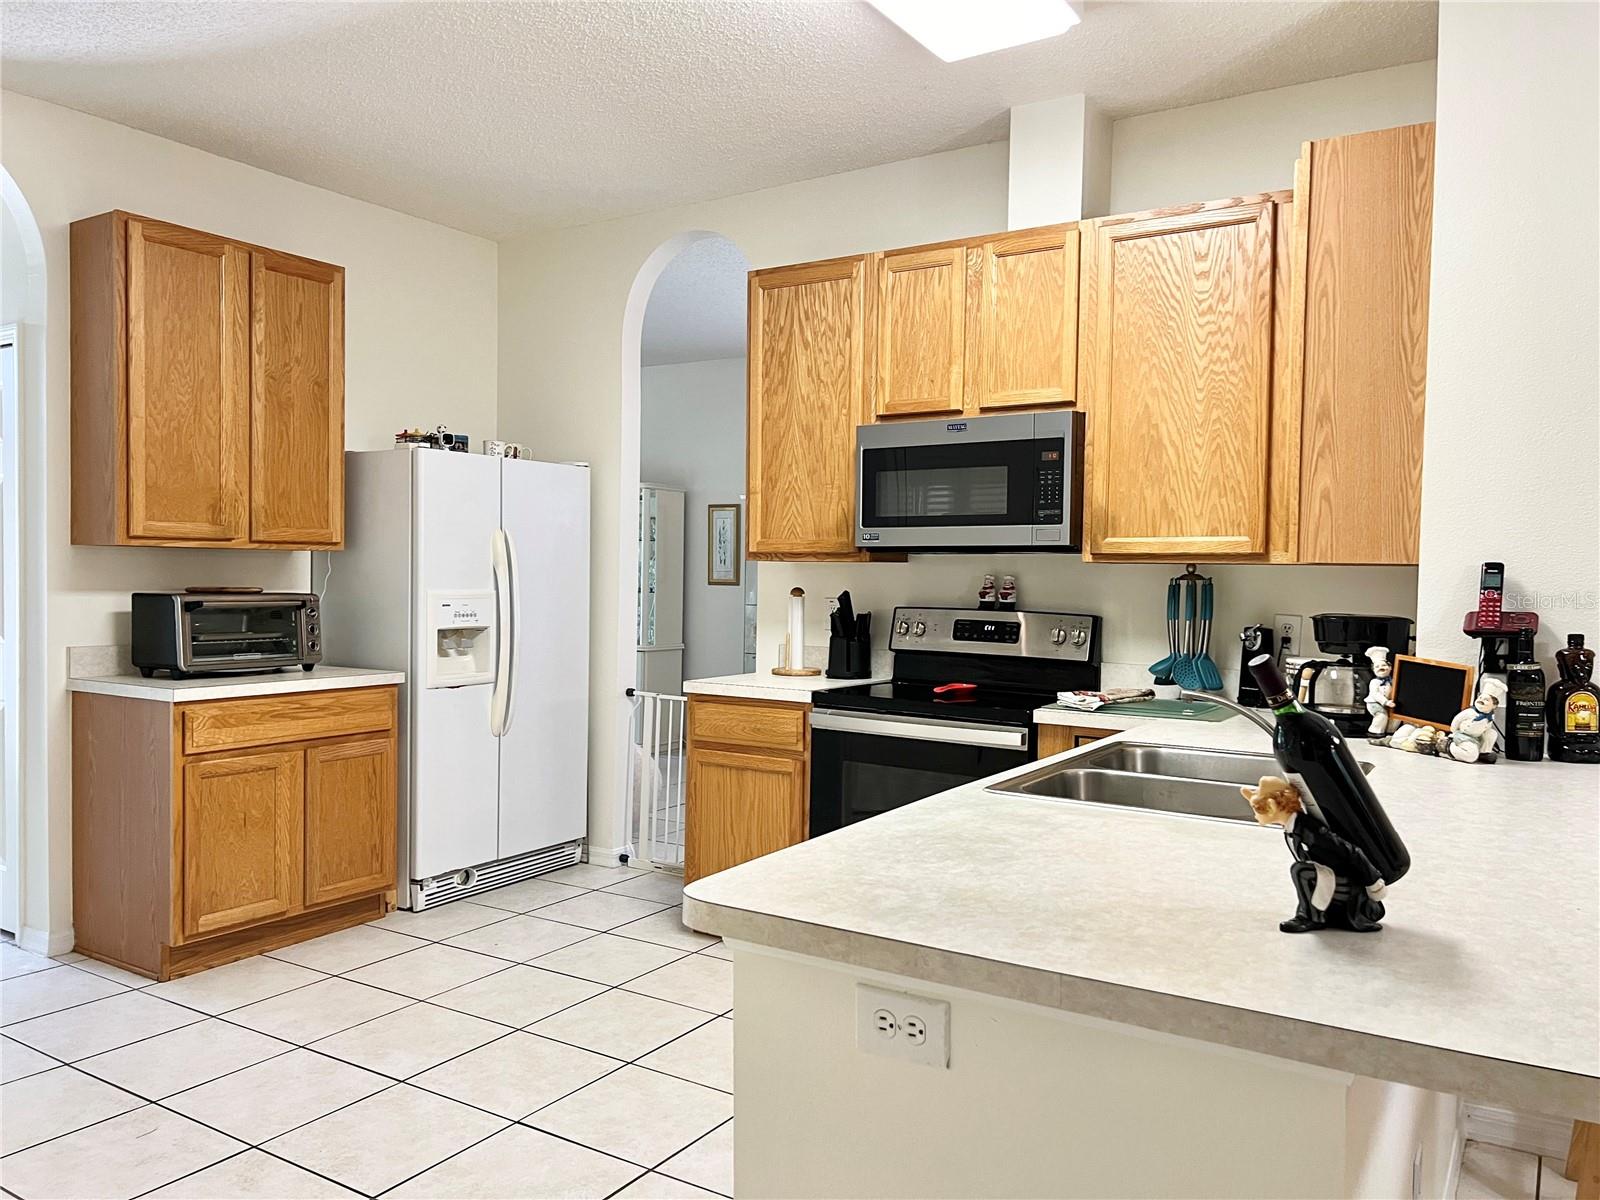 Kitchen - All Appliances Included